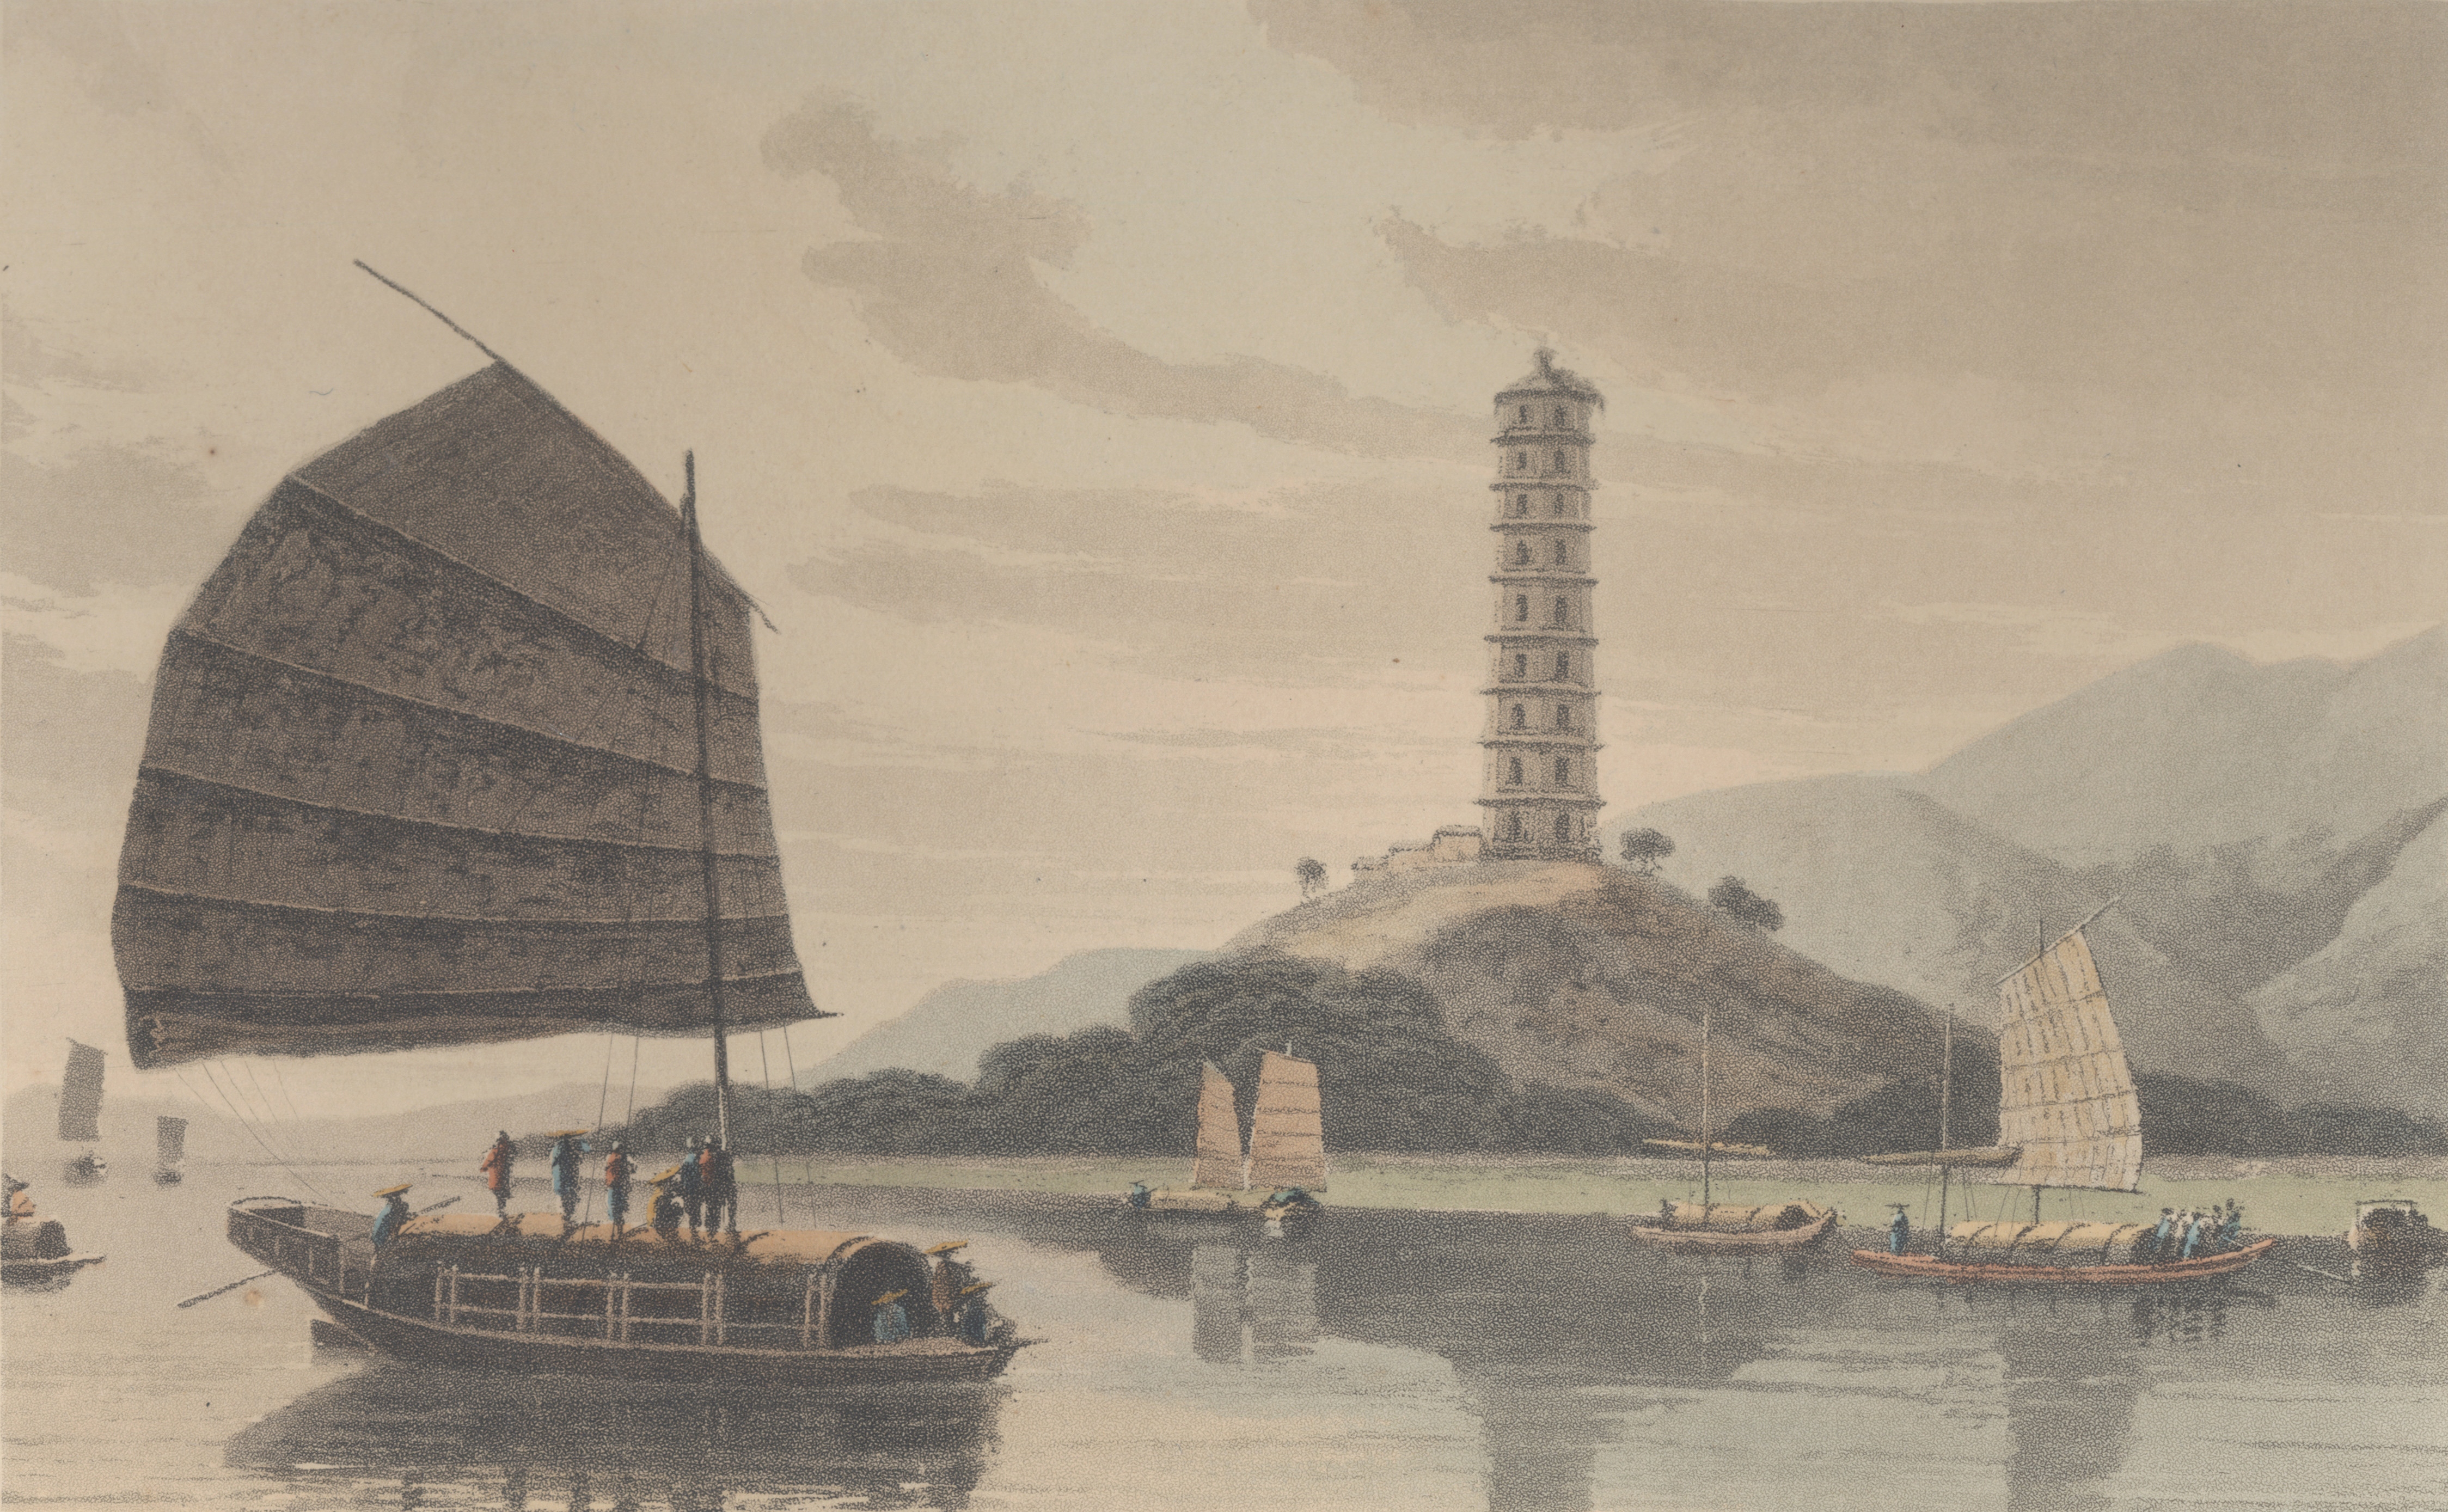 DANIELL (THOMAS AND WILLIAM) A Picturesque Voyage to India; by the Way of China, Longman, 1810 - Image 2 of 2